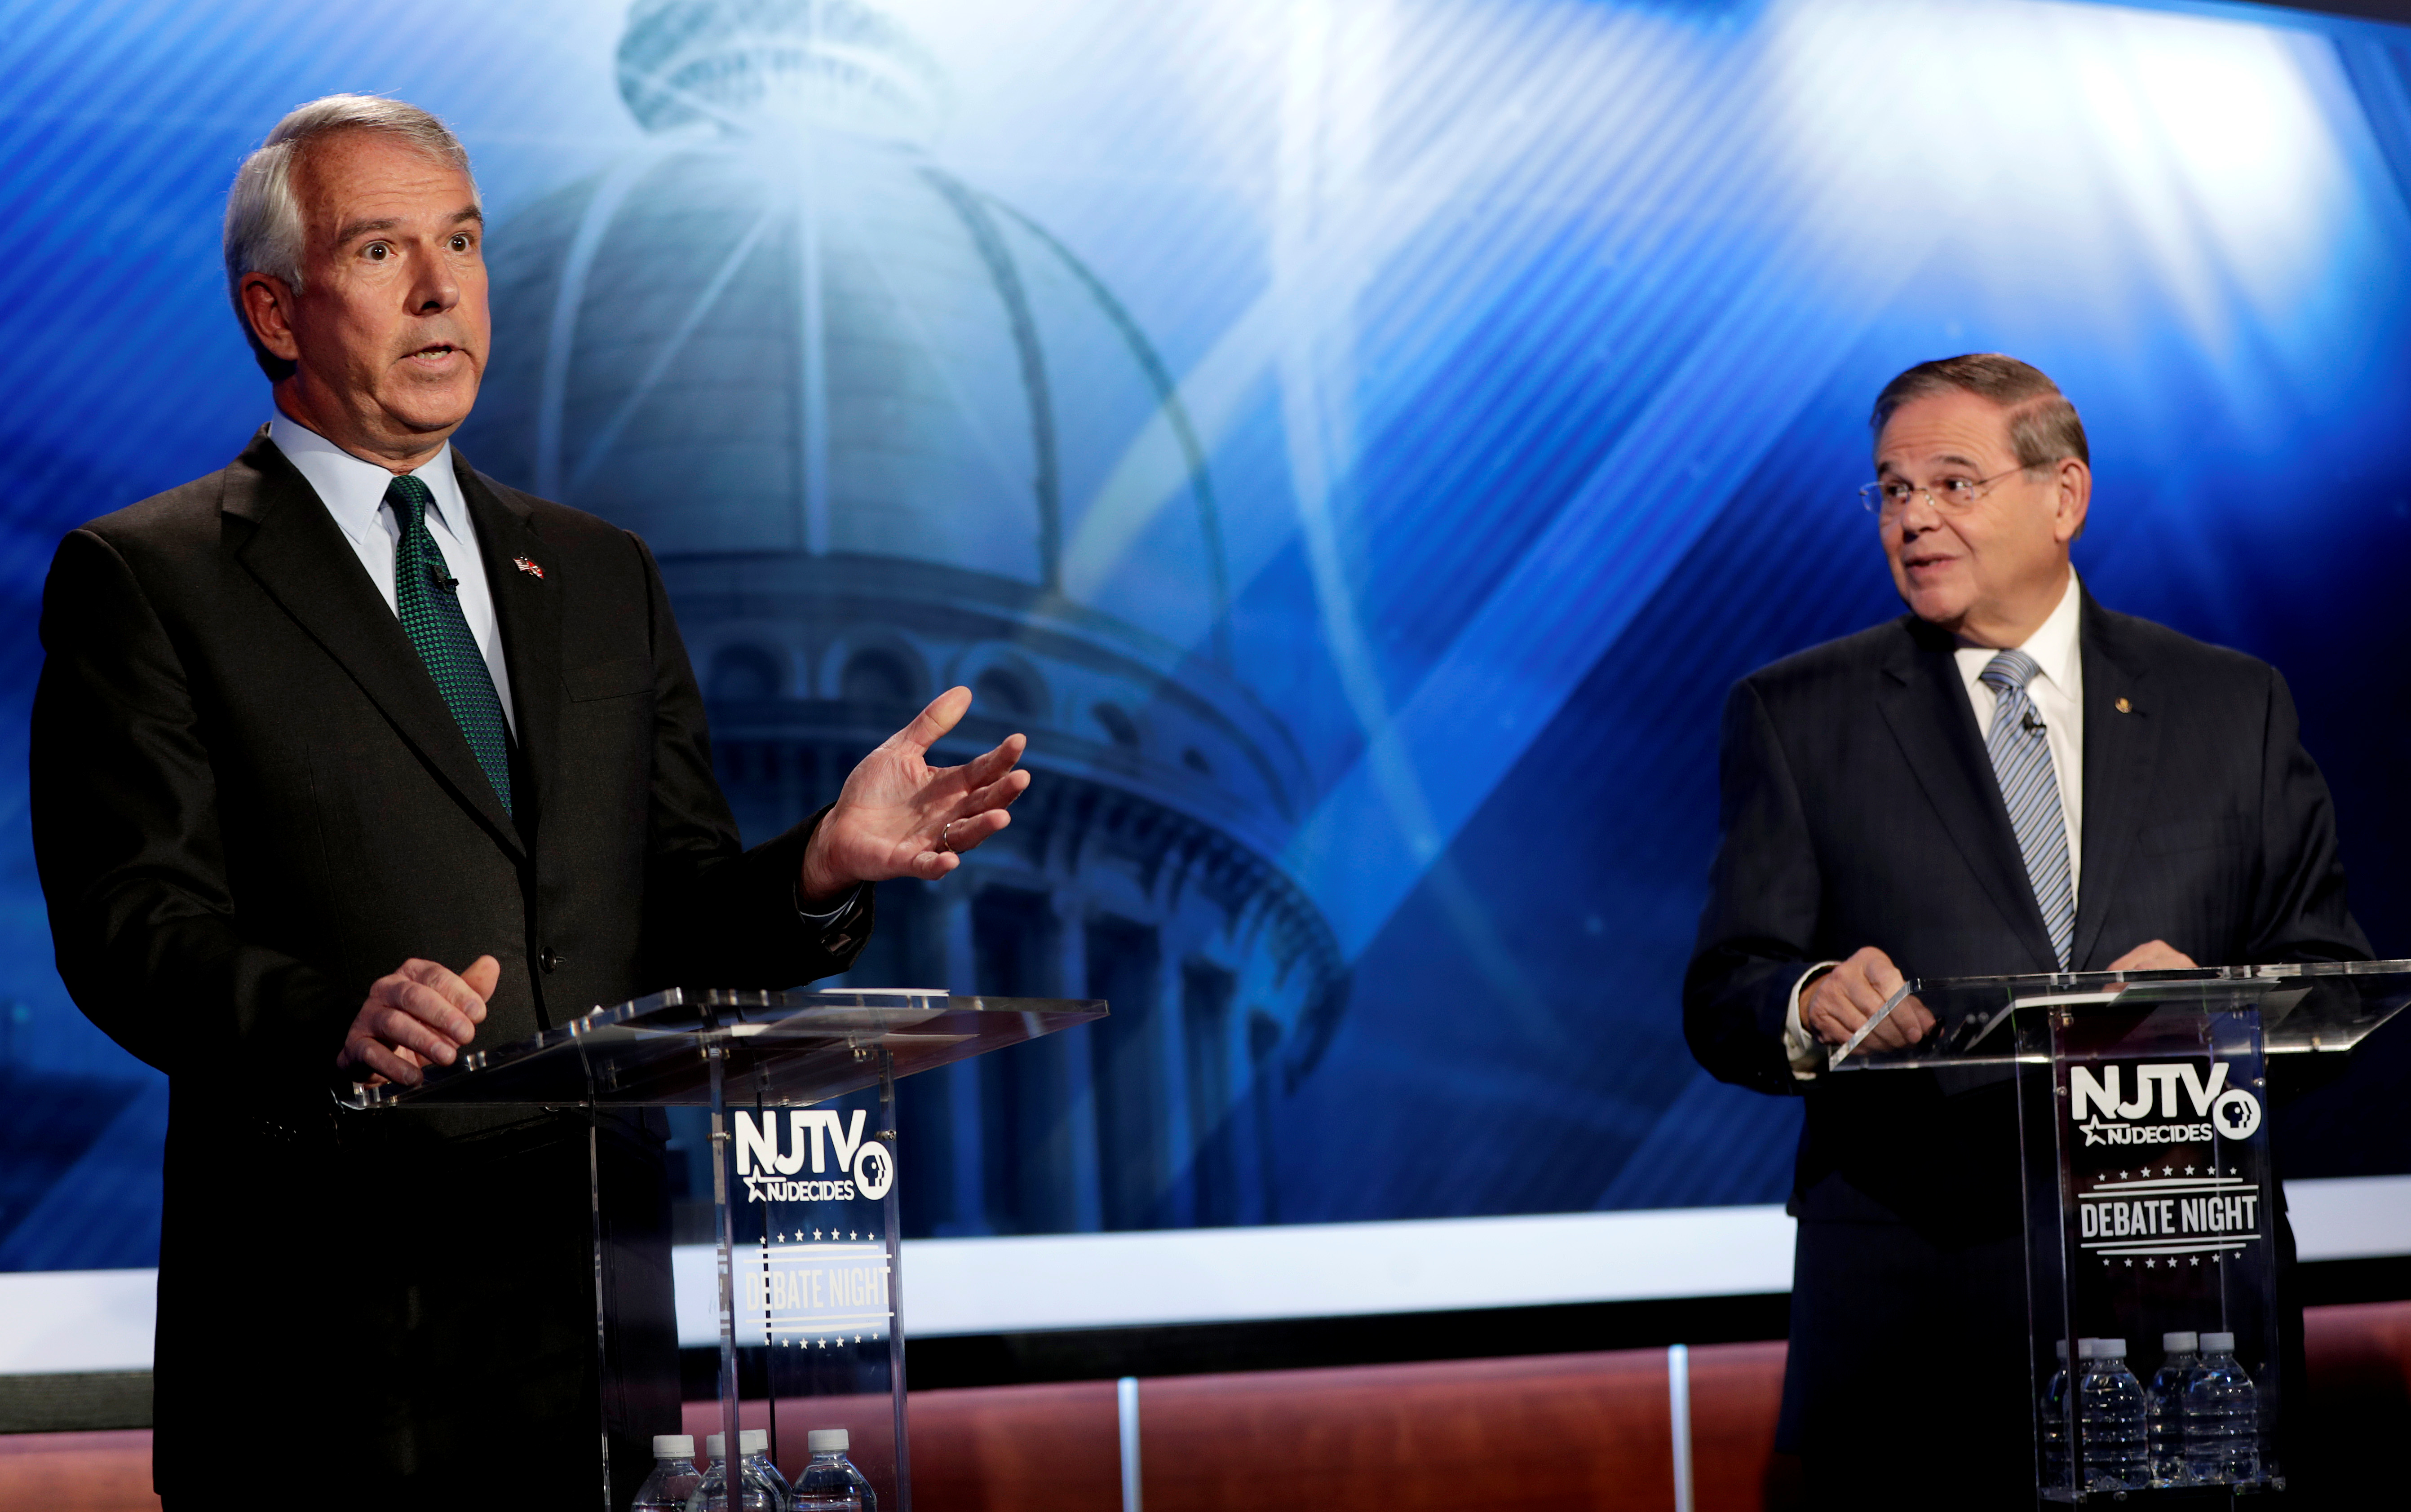 Bob Hugin, the Republican candidate for the U.S. Senate race in New Jersey, gestures as New Jersey Senator Bob Menendez, the Democrat candidate, looks on during a debate in Newark, New Jersey, U.S., October 24, 2018. Julio Cortez/Pool via Reuters